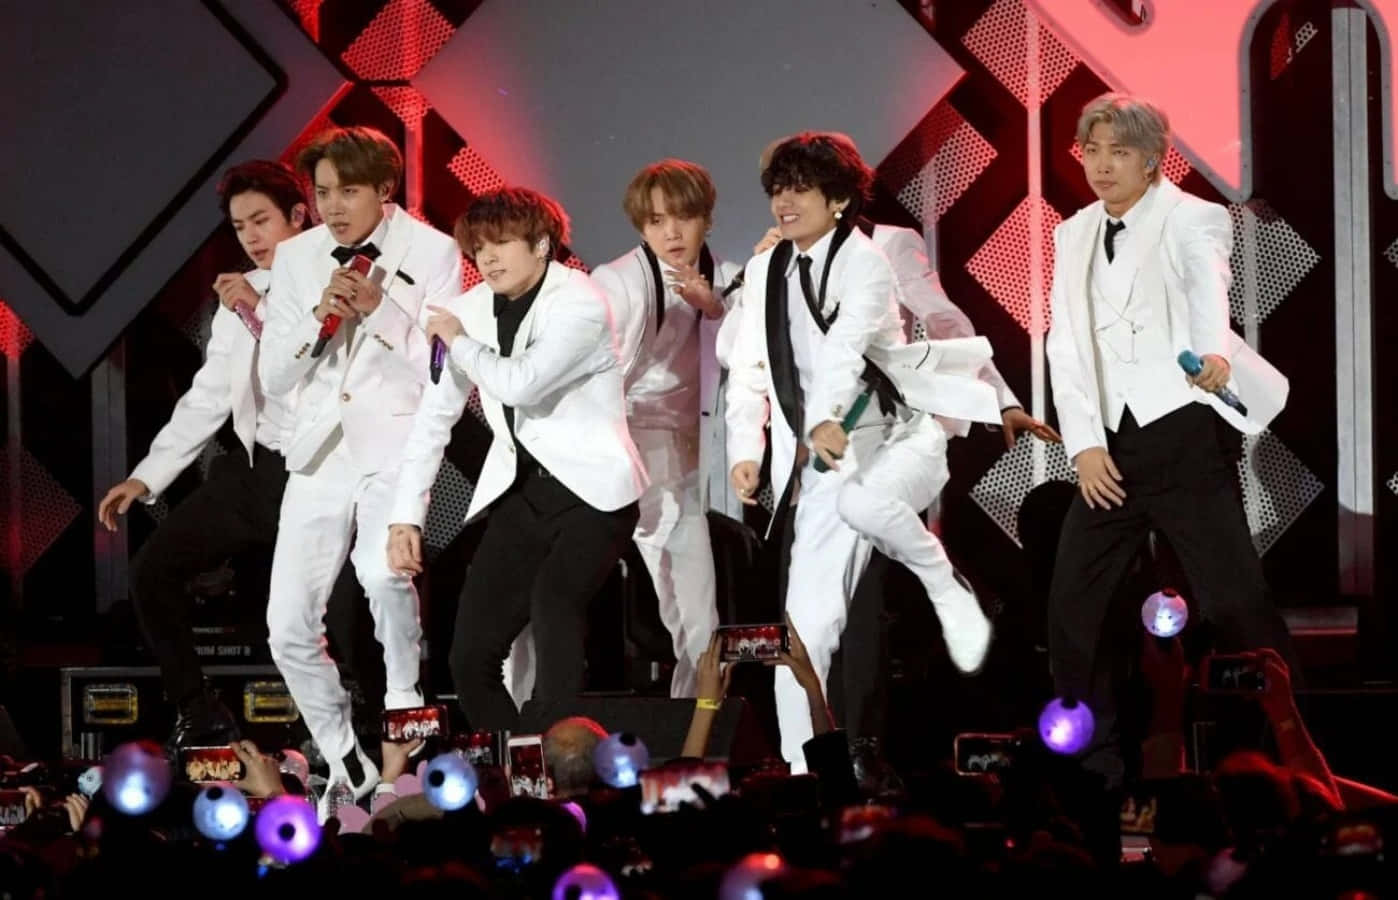 BTS puts on an electrifying performance at their concert!